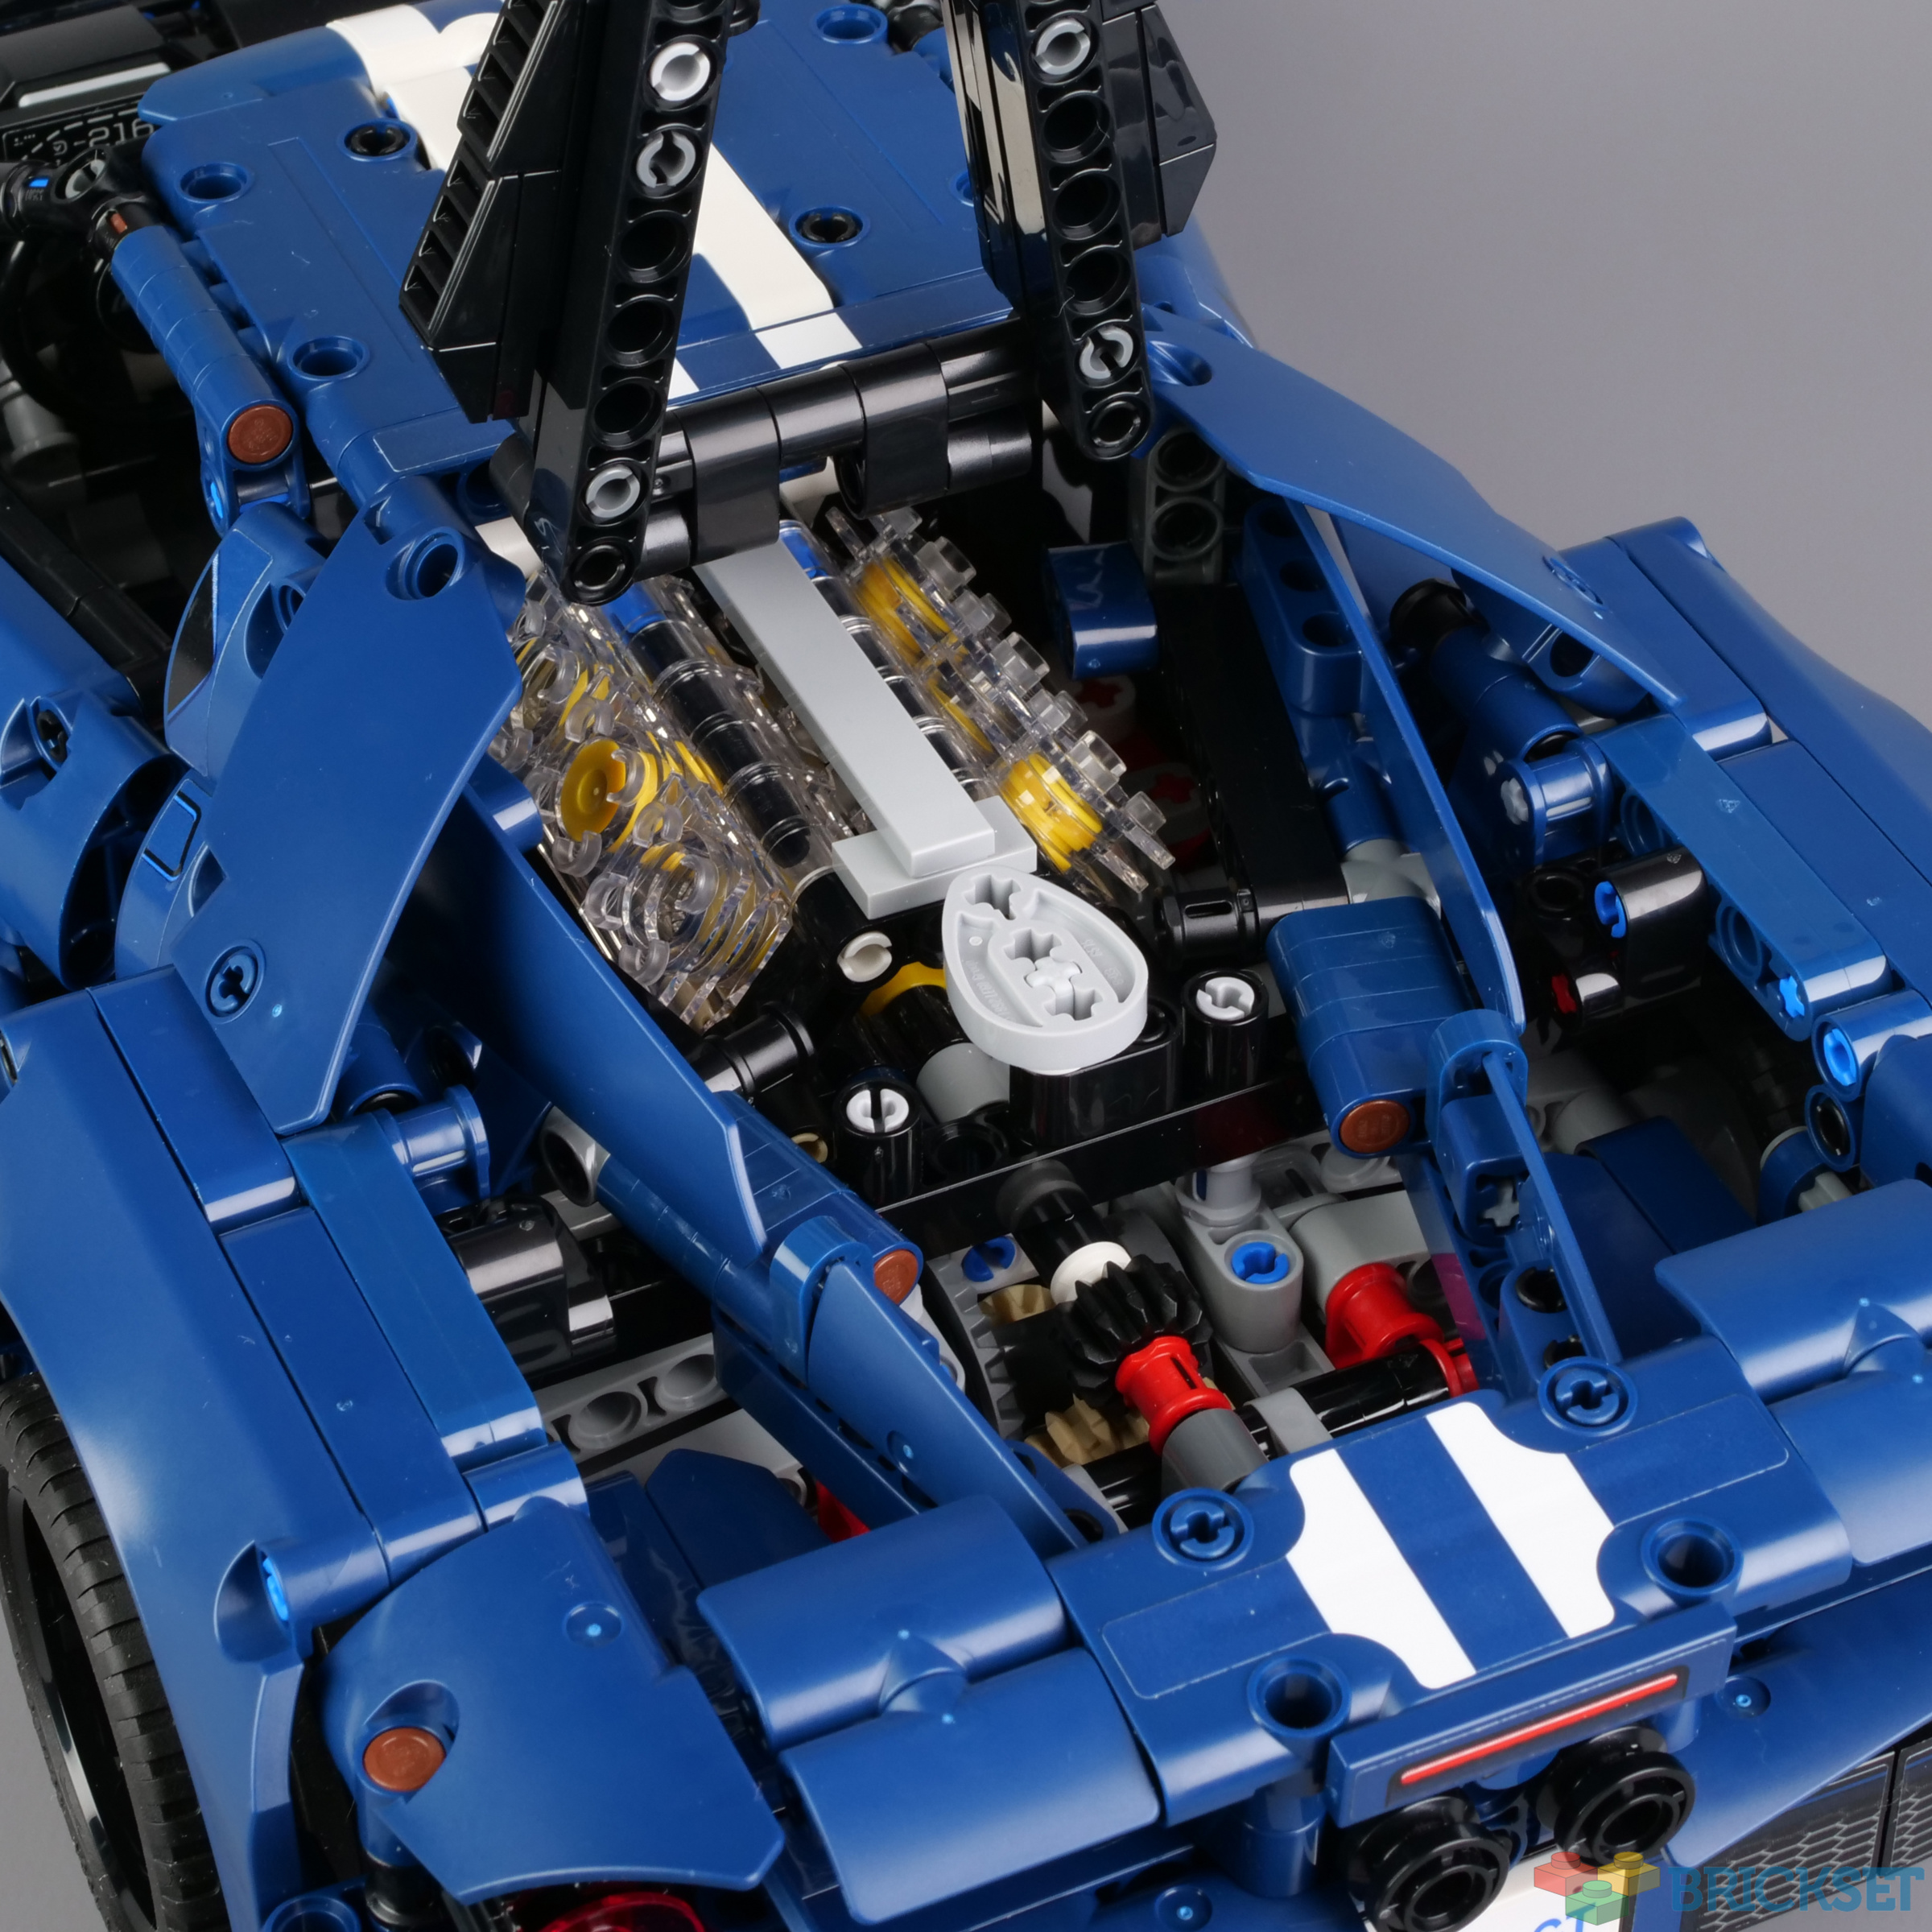 Lego Ford GT is A Fine Send-Off For Those Who Can't Afford The